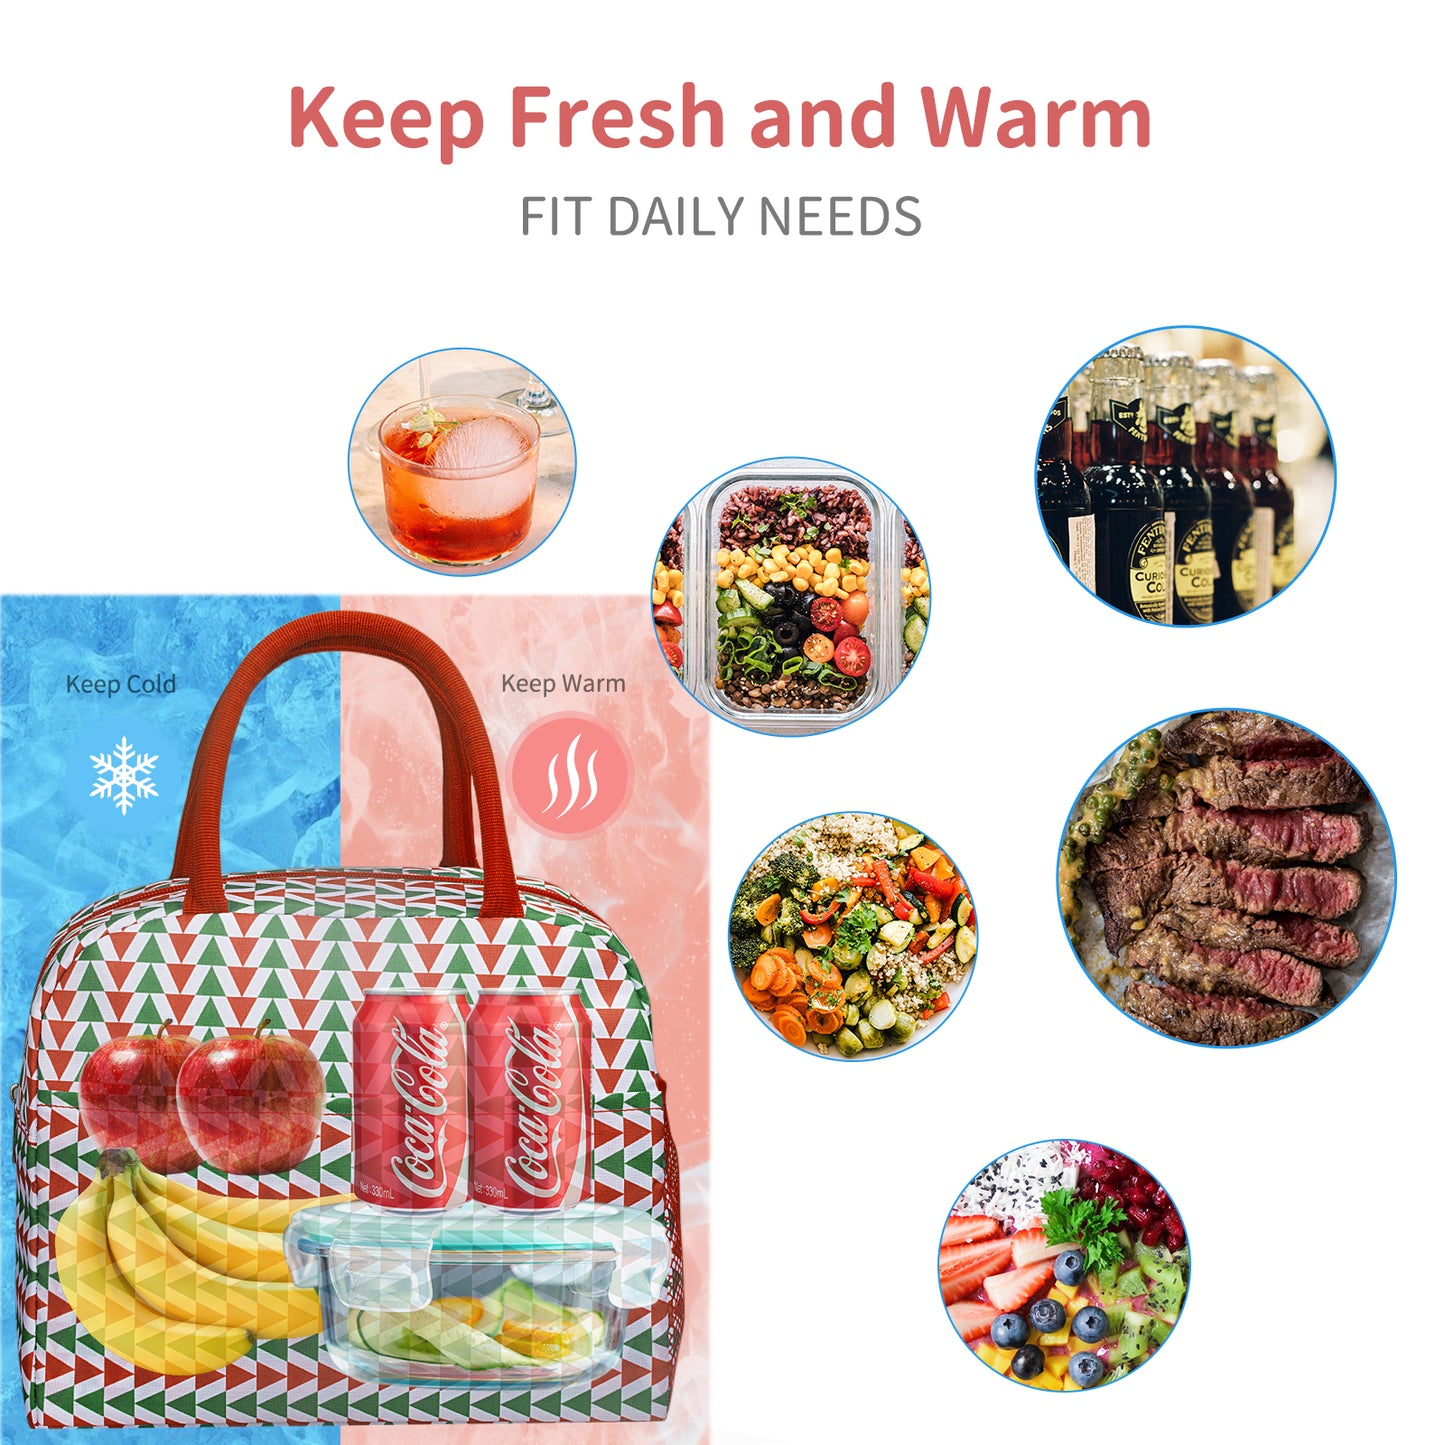 Lunch Bag Lunch Box for Women Men Reusable Insulated Lunch Tote Bag,Leakproof Thermal Cooler Sack Food Handbags Case High Capacity forTravel Work School Picnic-RedF